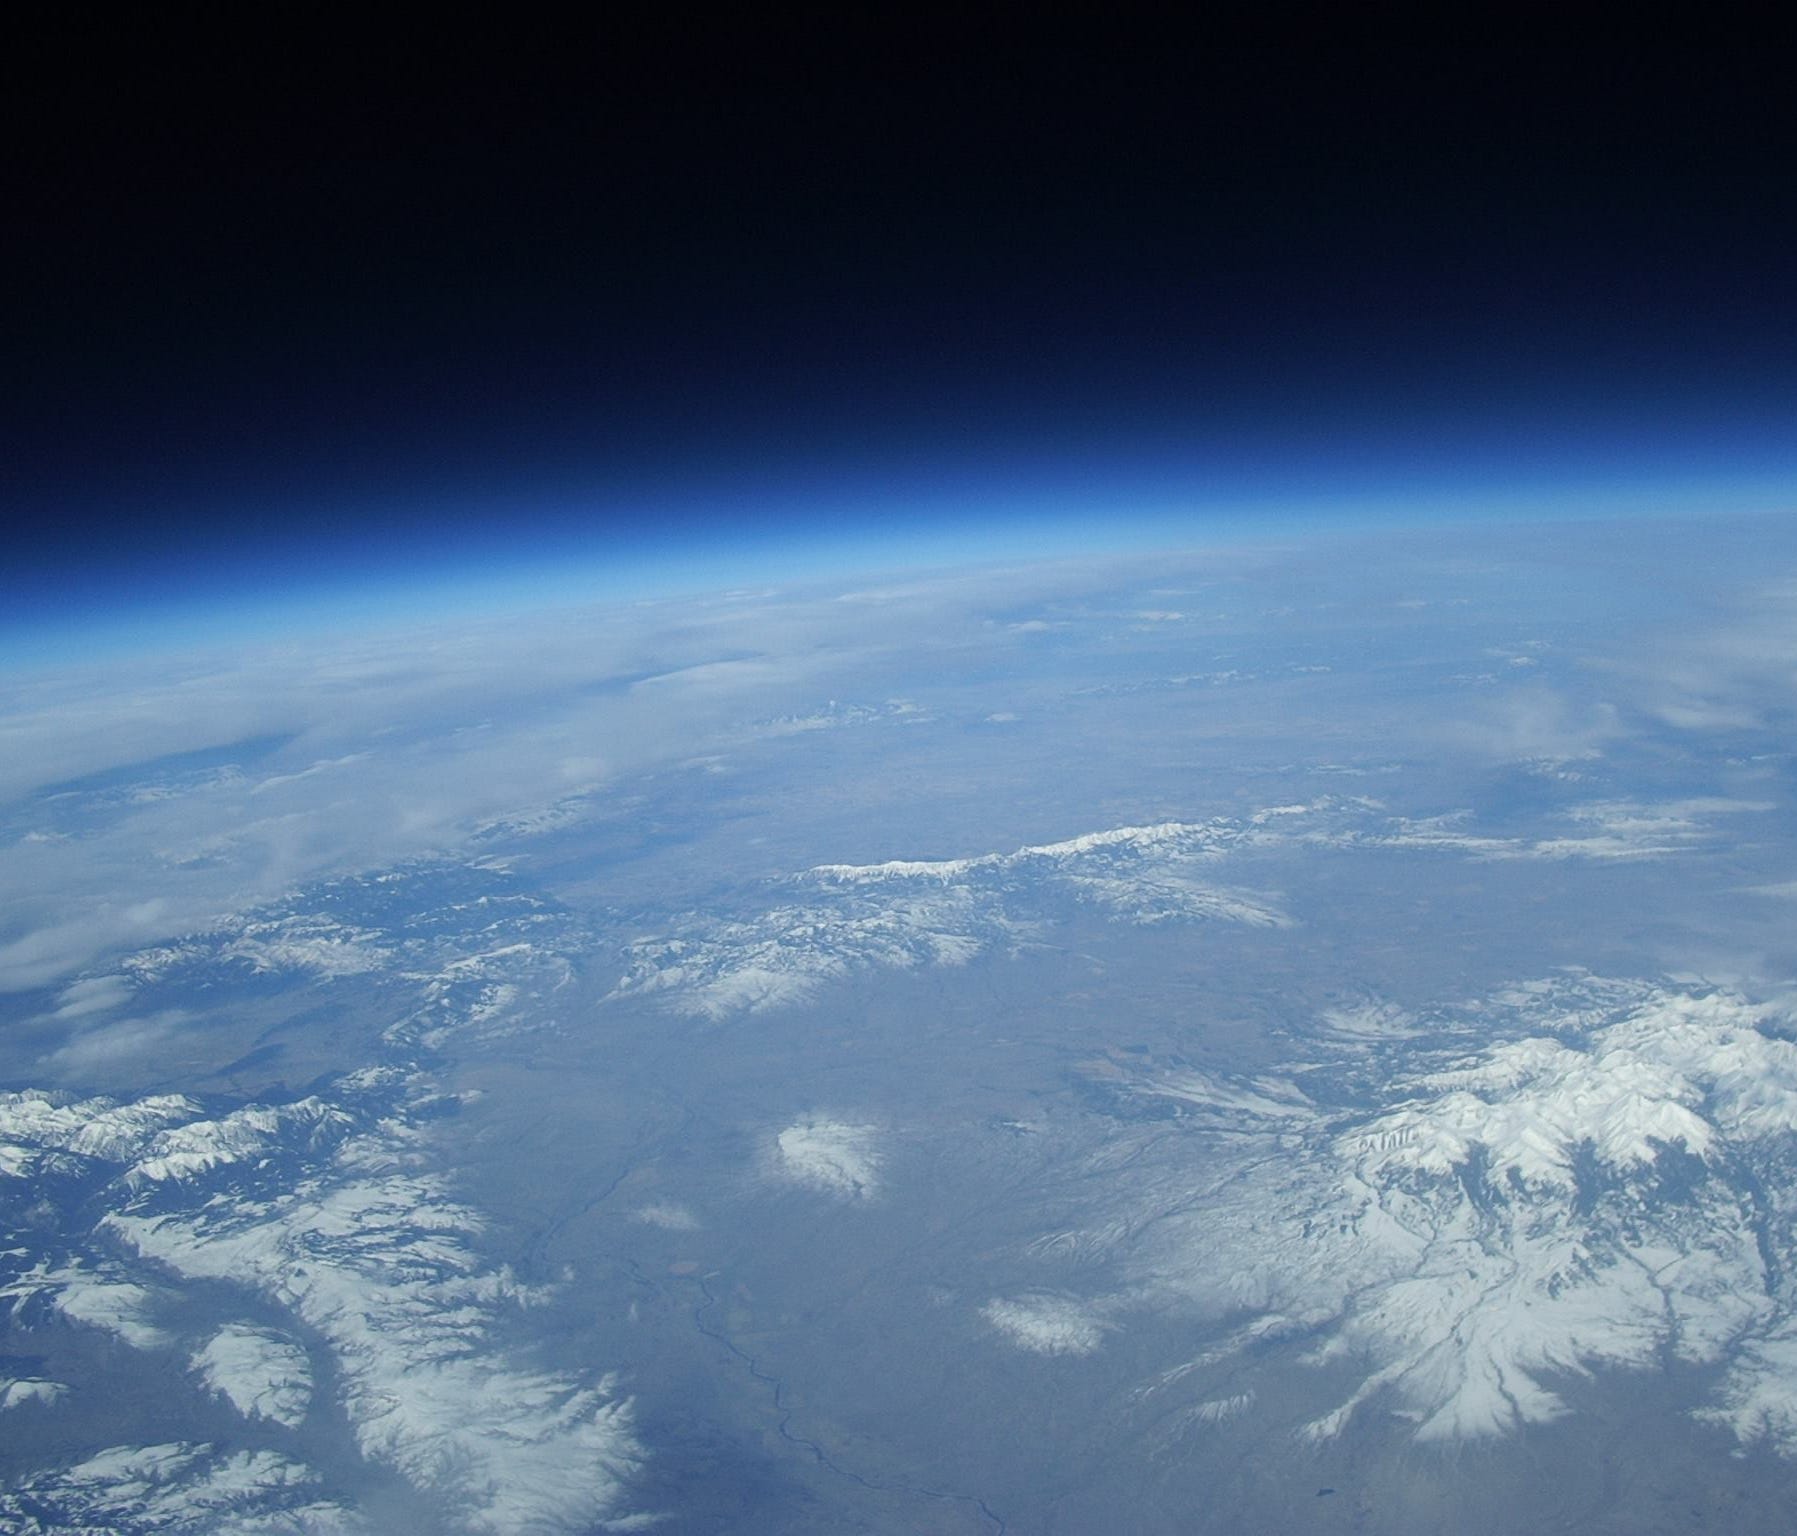 The view from 100,000 feet, part of NASA's Eclipse live-streaming project